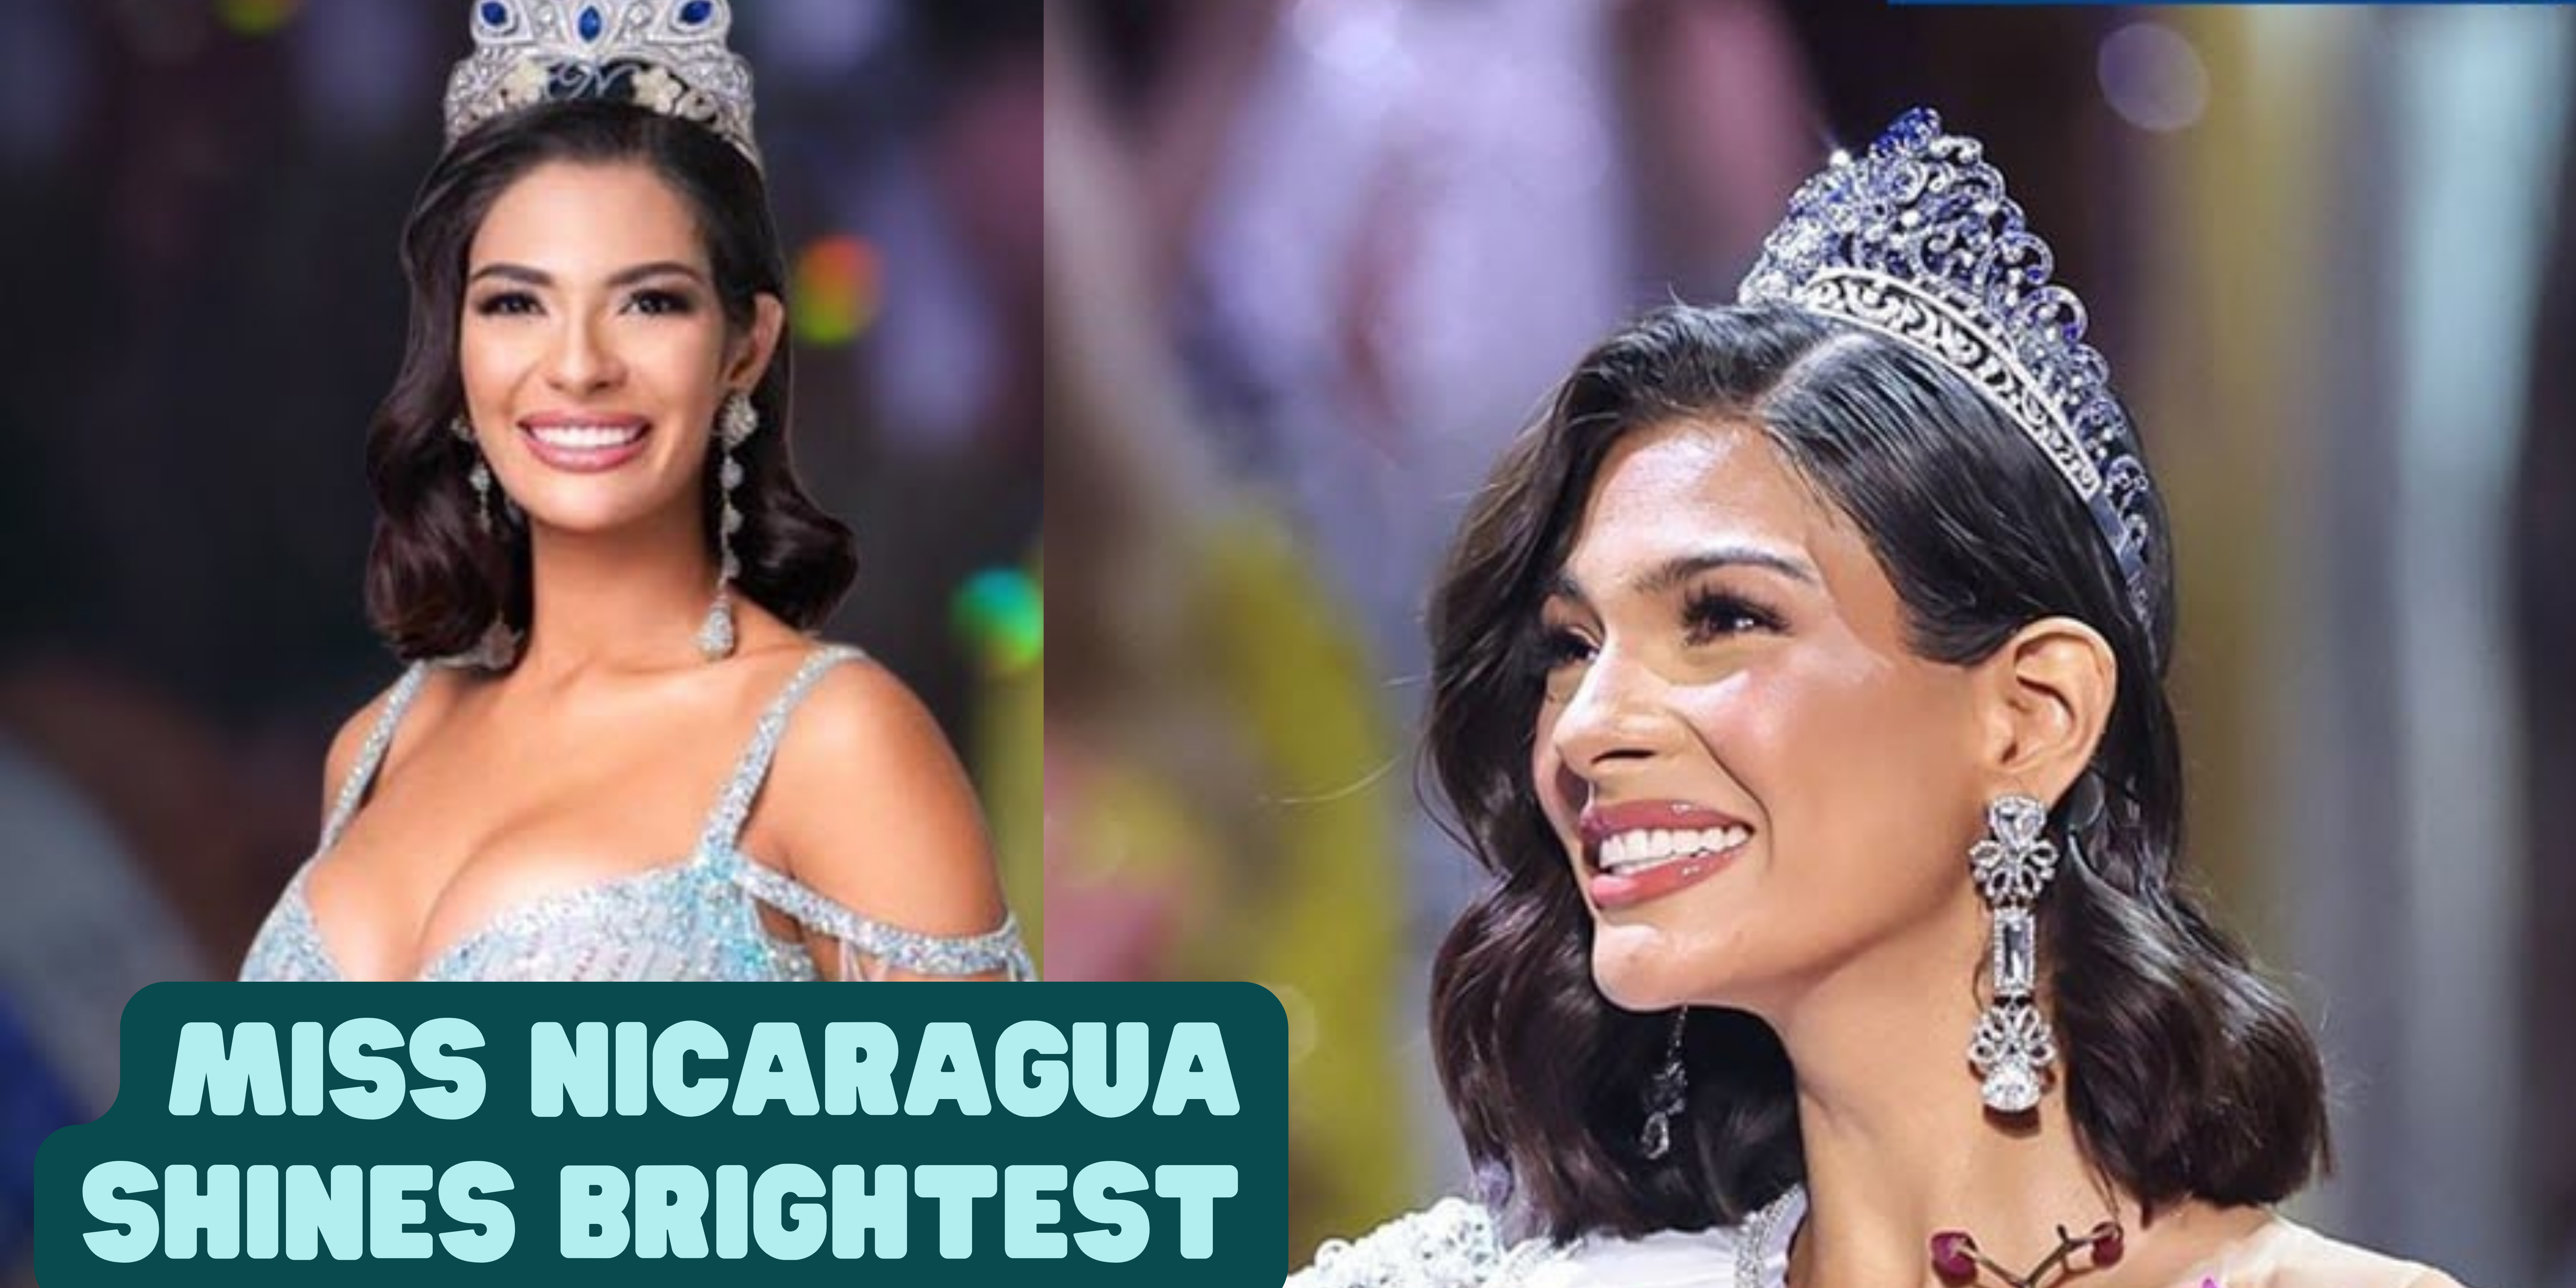 Miss Nicaragua Shines Brightest